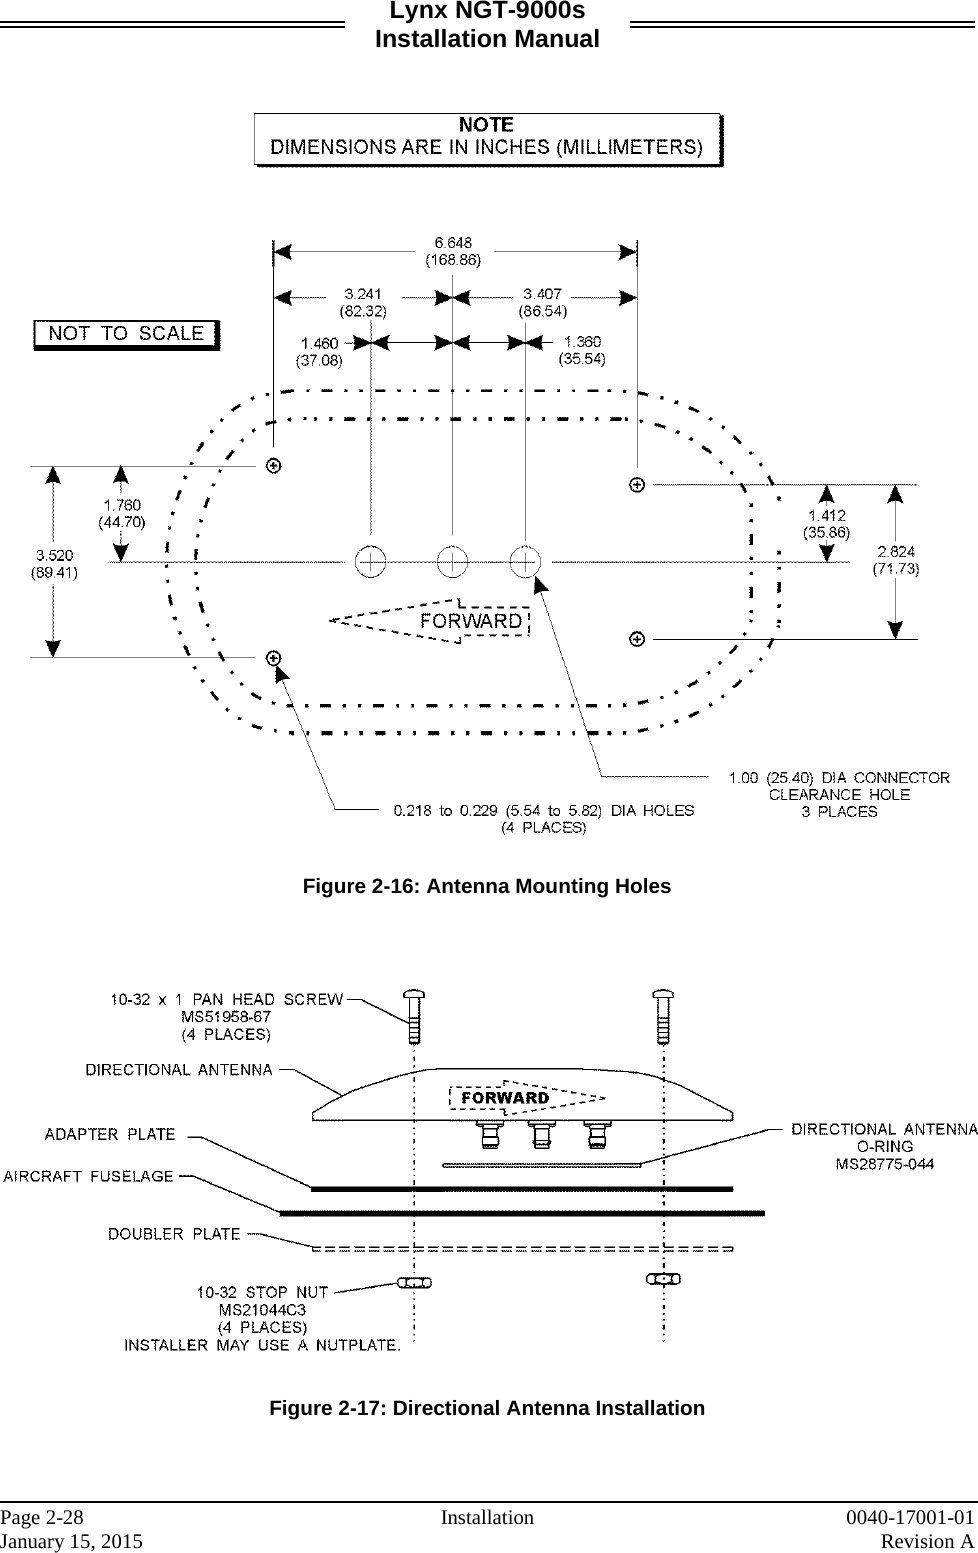 Lynx NGT-9000s Installation Manual     Figure 2-16: Antenna Mounting Holes      Figure 2-17: Directional Antenna Installation     Page 2-28 Installation 0040-17001-01 January 15, 2015    Revision A  